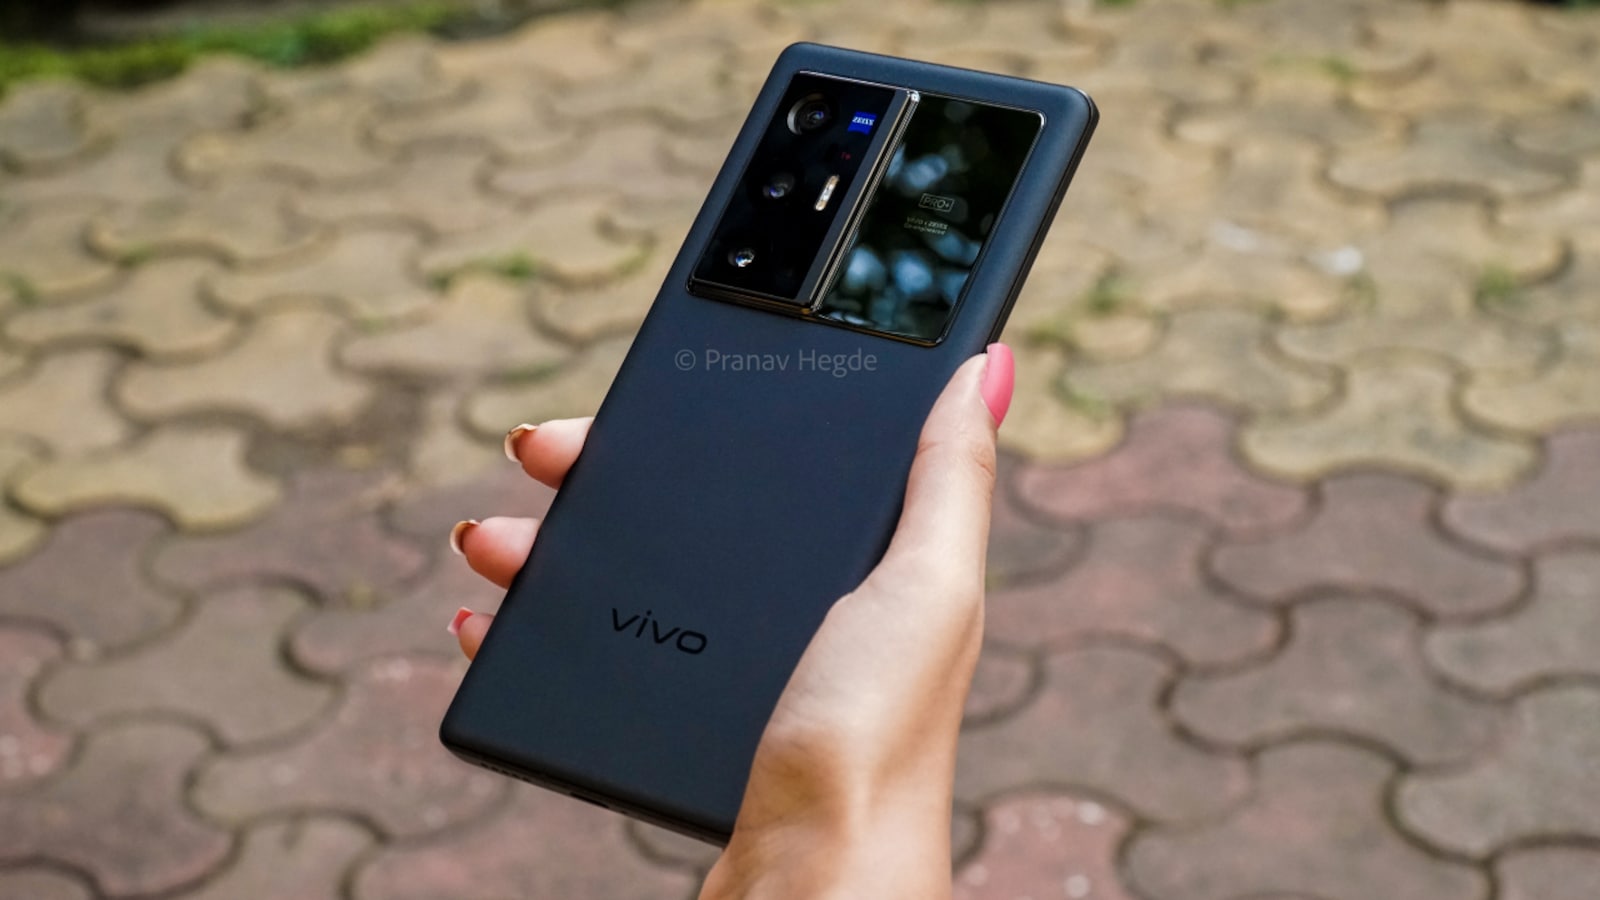 Vivo V21 5G review: Stylish phone with feature-rich camera